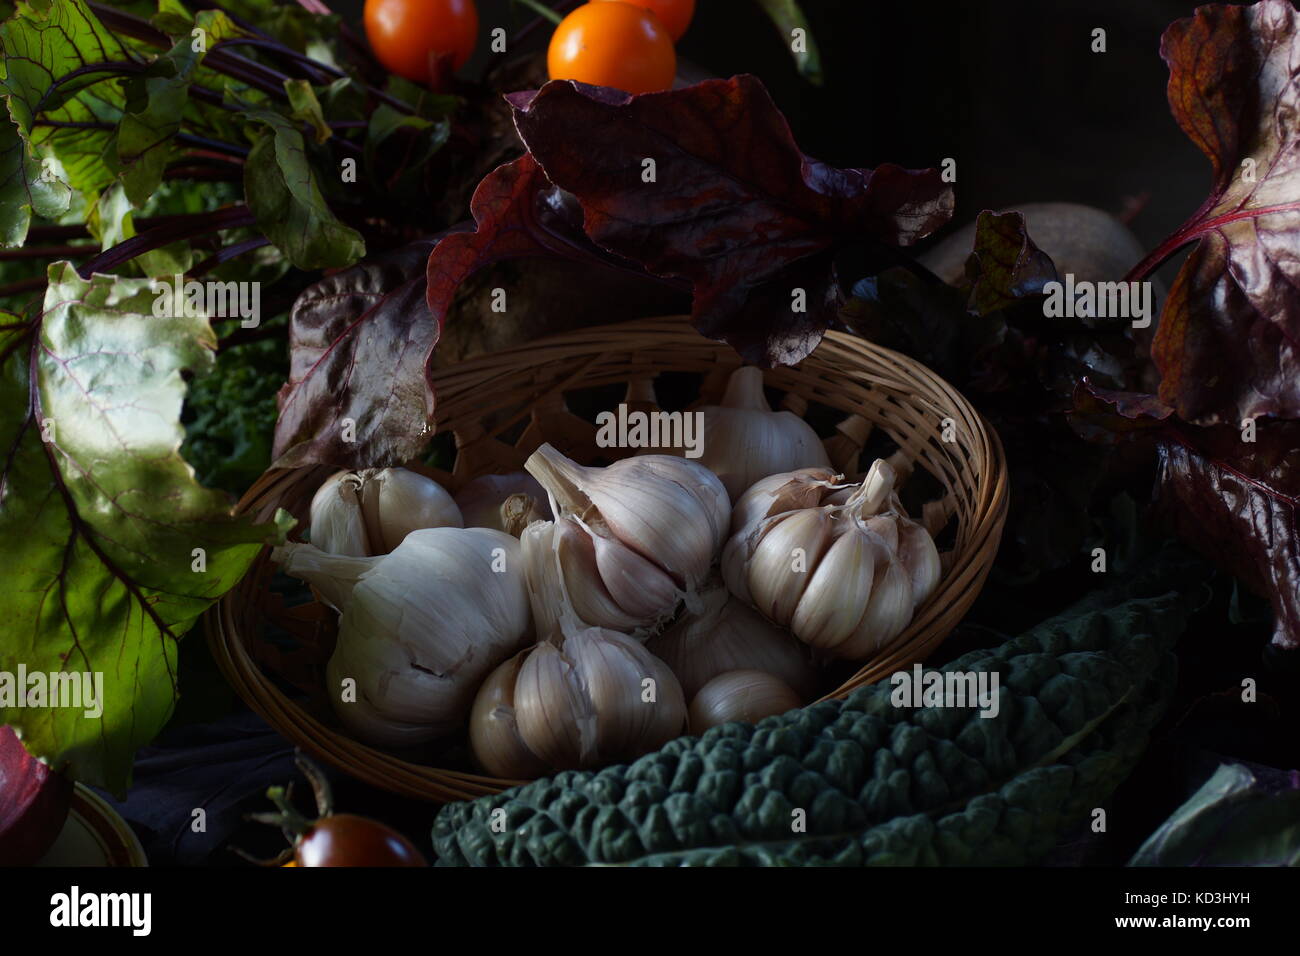 Still life: basket with garlic, tomatoes, kale leaves  and Brussels red cabbage  among the greens on the table. Stock Photo